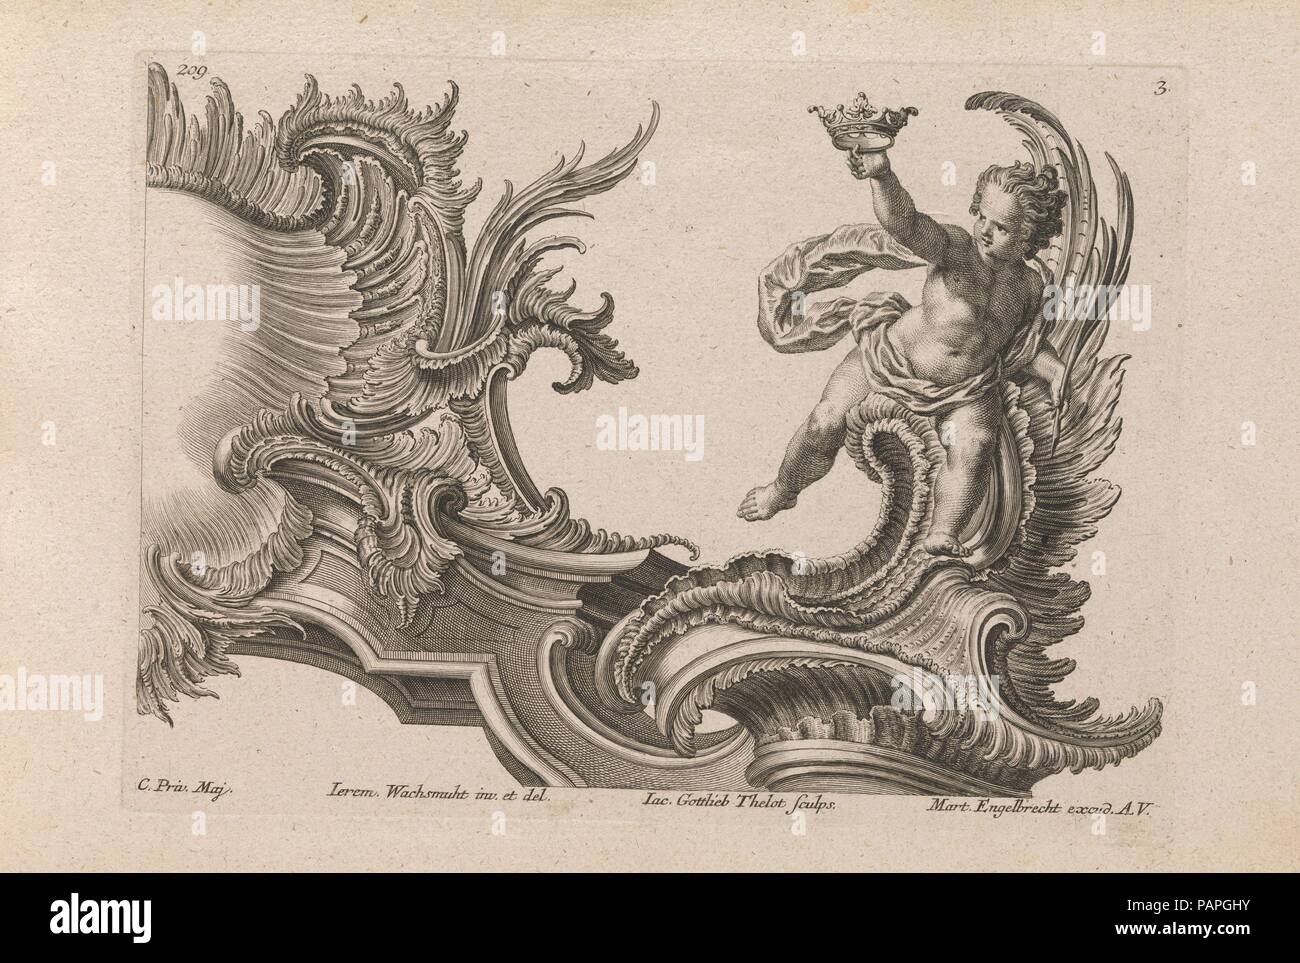 Design for a Rocaille Cartouche with the Figure of a Putto, Plate 3 from an untitled series with architectural cartouches and allegorical figures. Artist: After Jeremias Wachsmuth (German, 1712-1771). Dimensions: Overall: 8 7/16 × 13 3/4 in. (21.5 × 35 cm). Engraver: Jacob Gottlieb Thelot (German, Augsburg 1708-1760 Augsburg). Publisher: Martin Engelbrecht (German, Augsburg 1684-1756 Augsburg). Date: Printed ca. 1750-56.  Ornament print with a design for the right half of a large cartouche with the figure of a putto holding up a crown, bound in an album containing 27 series with a total of 122 Stock Photo